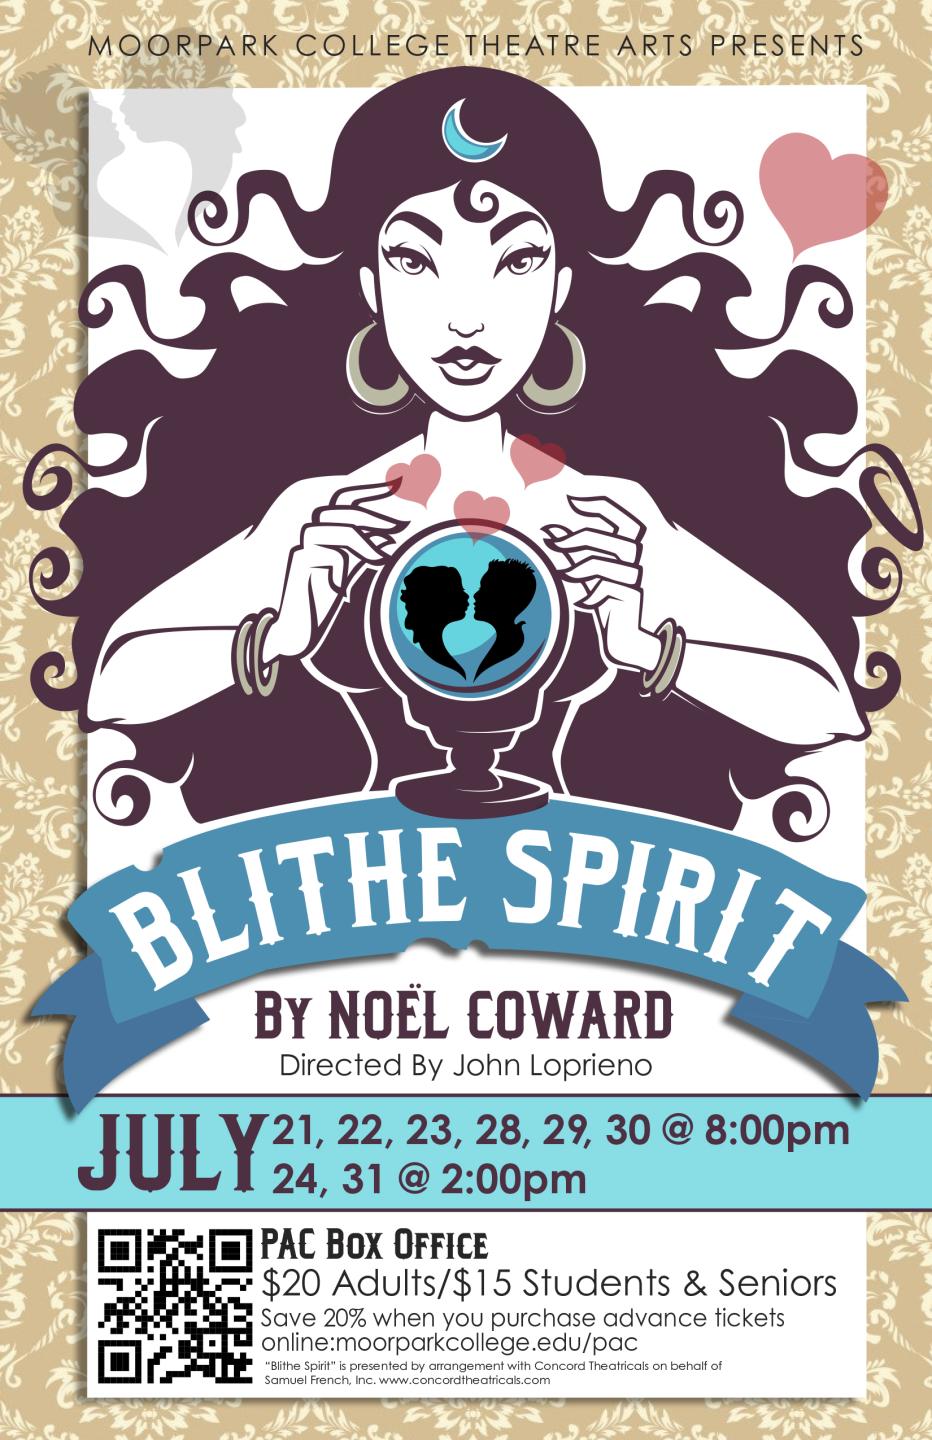 An image of a medium with a crystal ball showing 2 lovers is used to promote performances of "Blithe Spirit" written by Noel Coward and performing at MC PAC July 21-31, 2022.